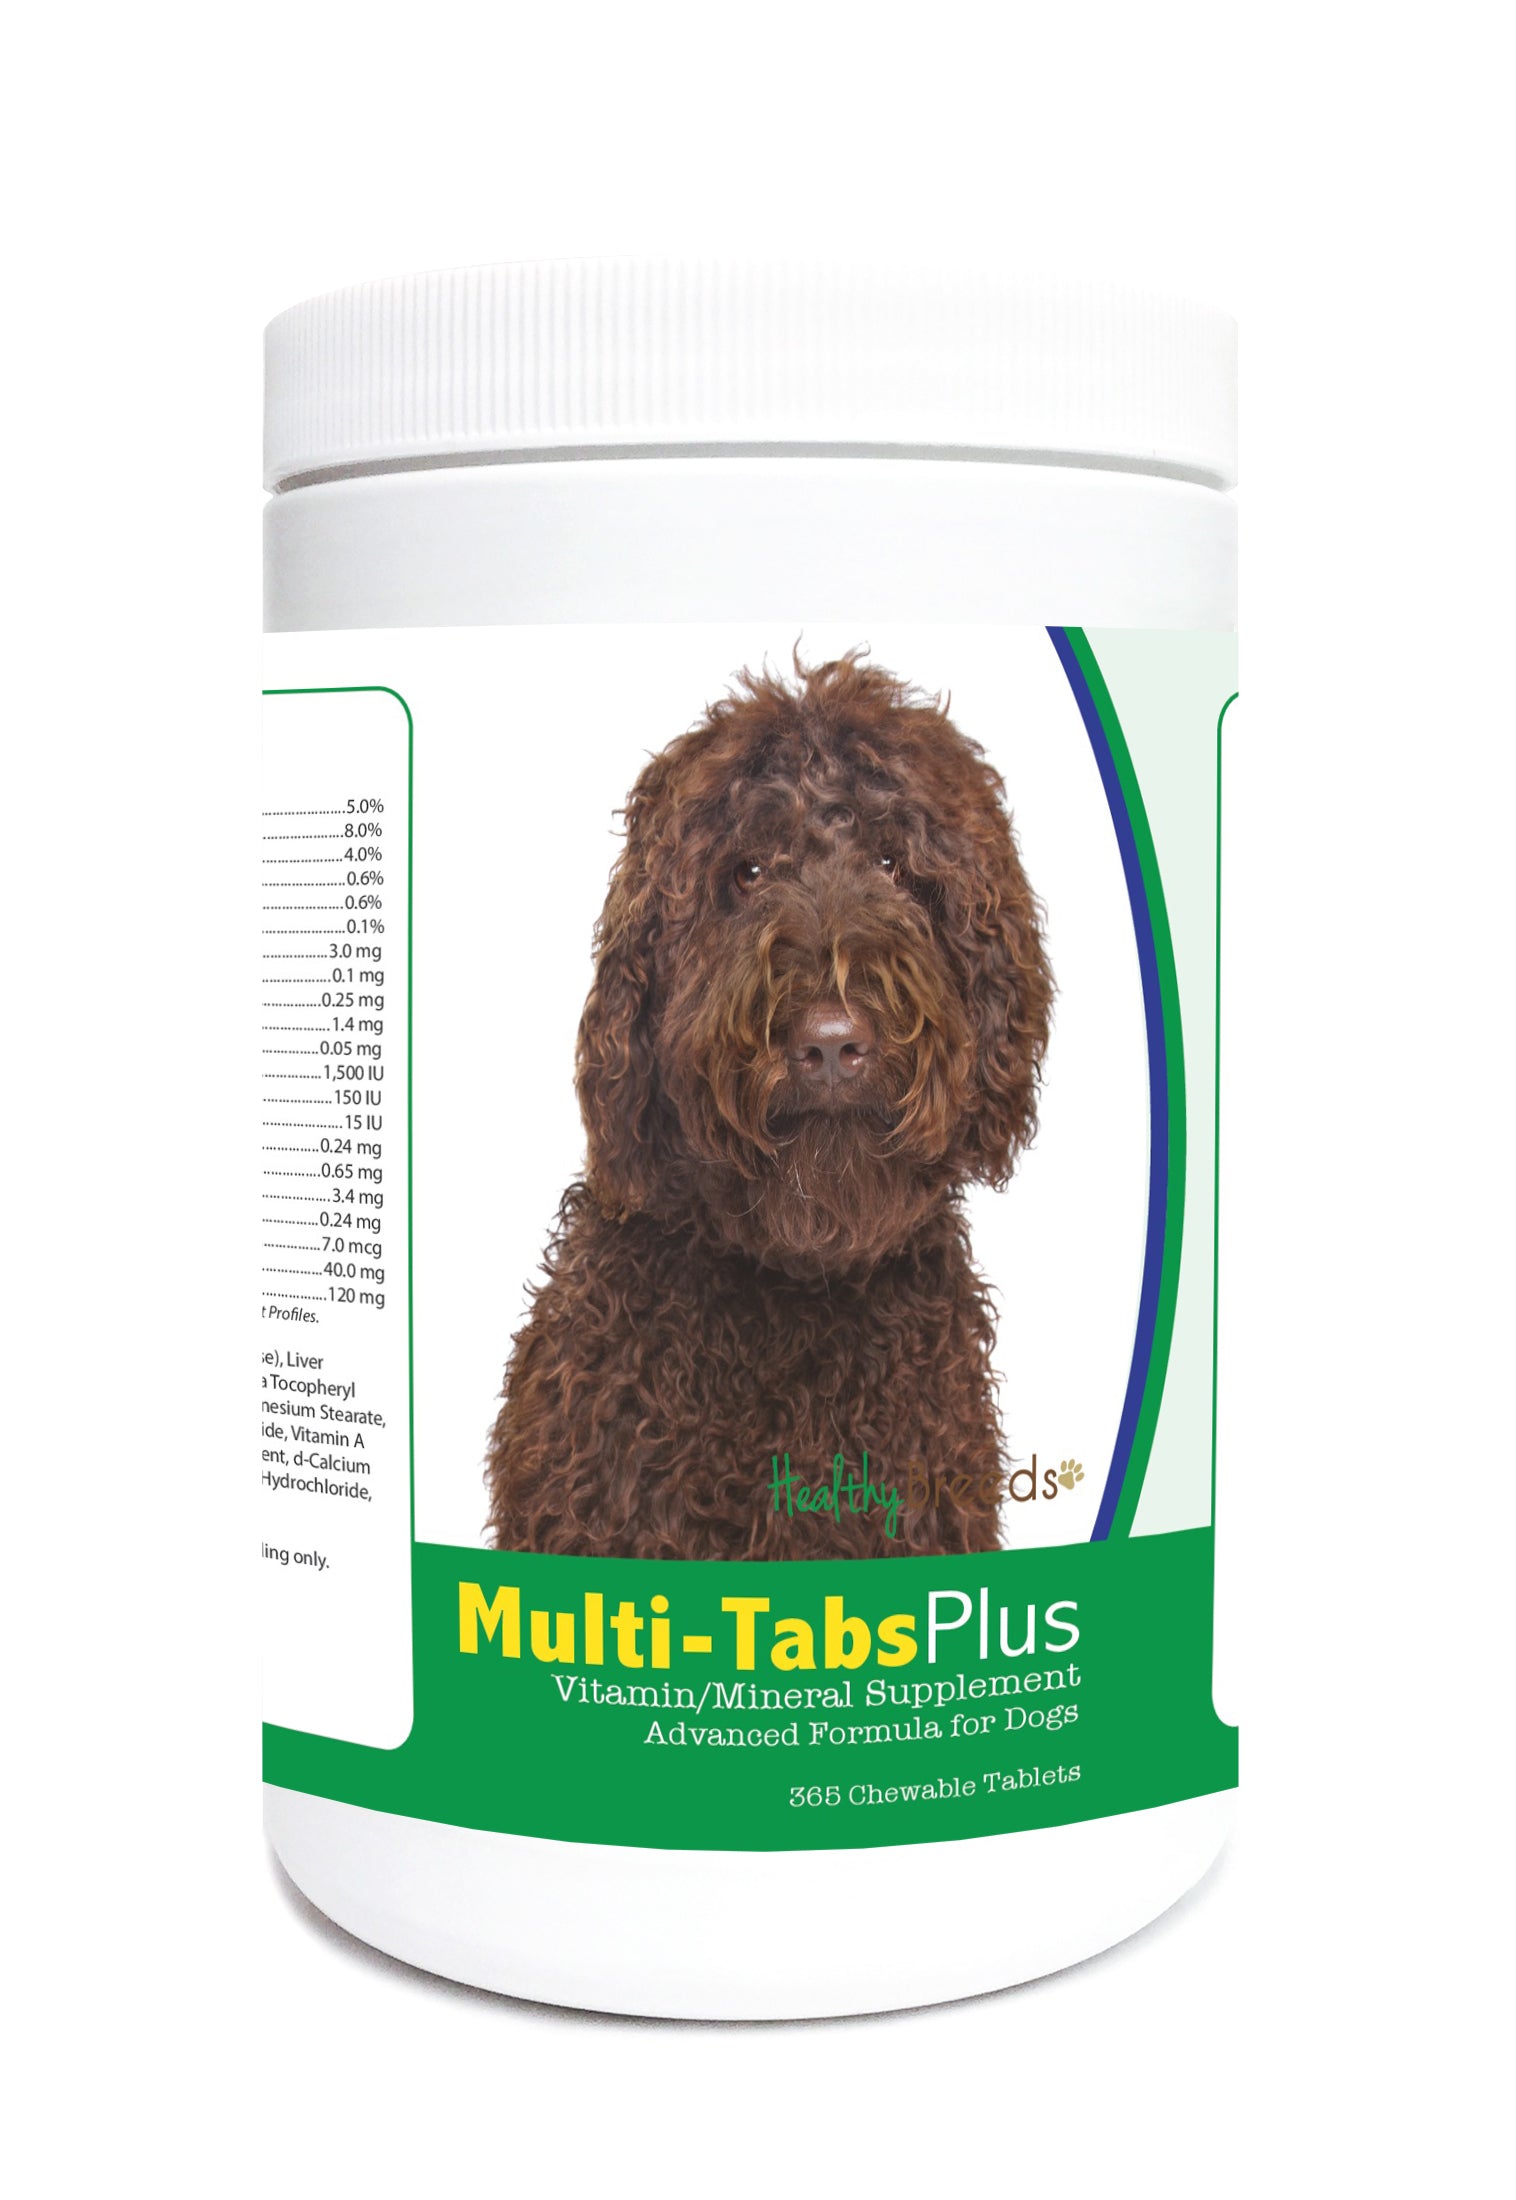 Labradoodle Multi-Tabs Plus Chewable Tablets 365 Count